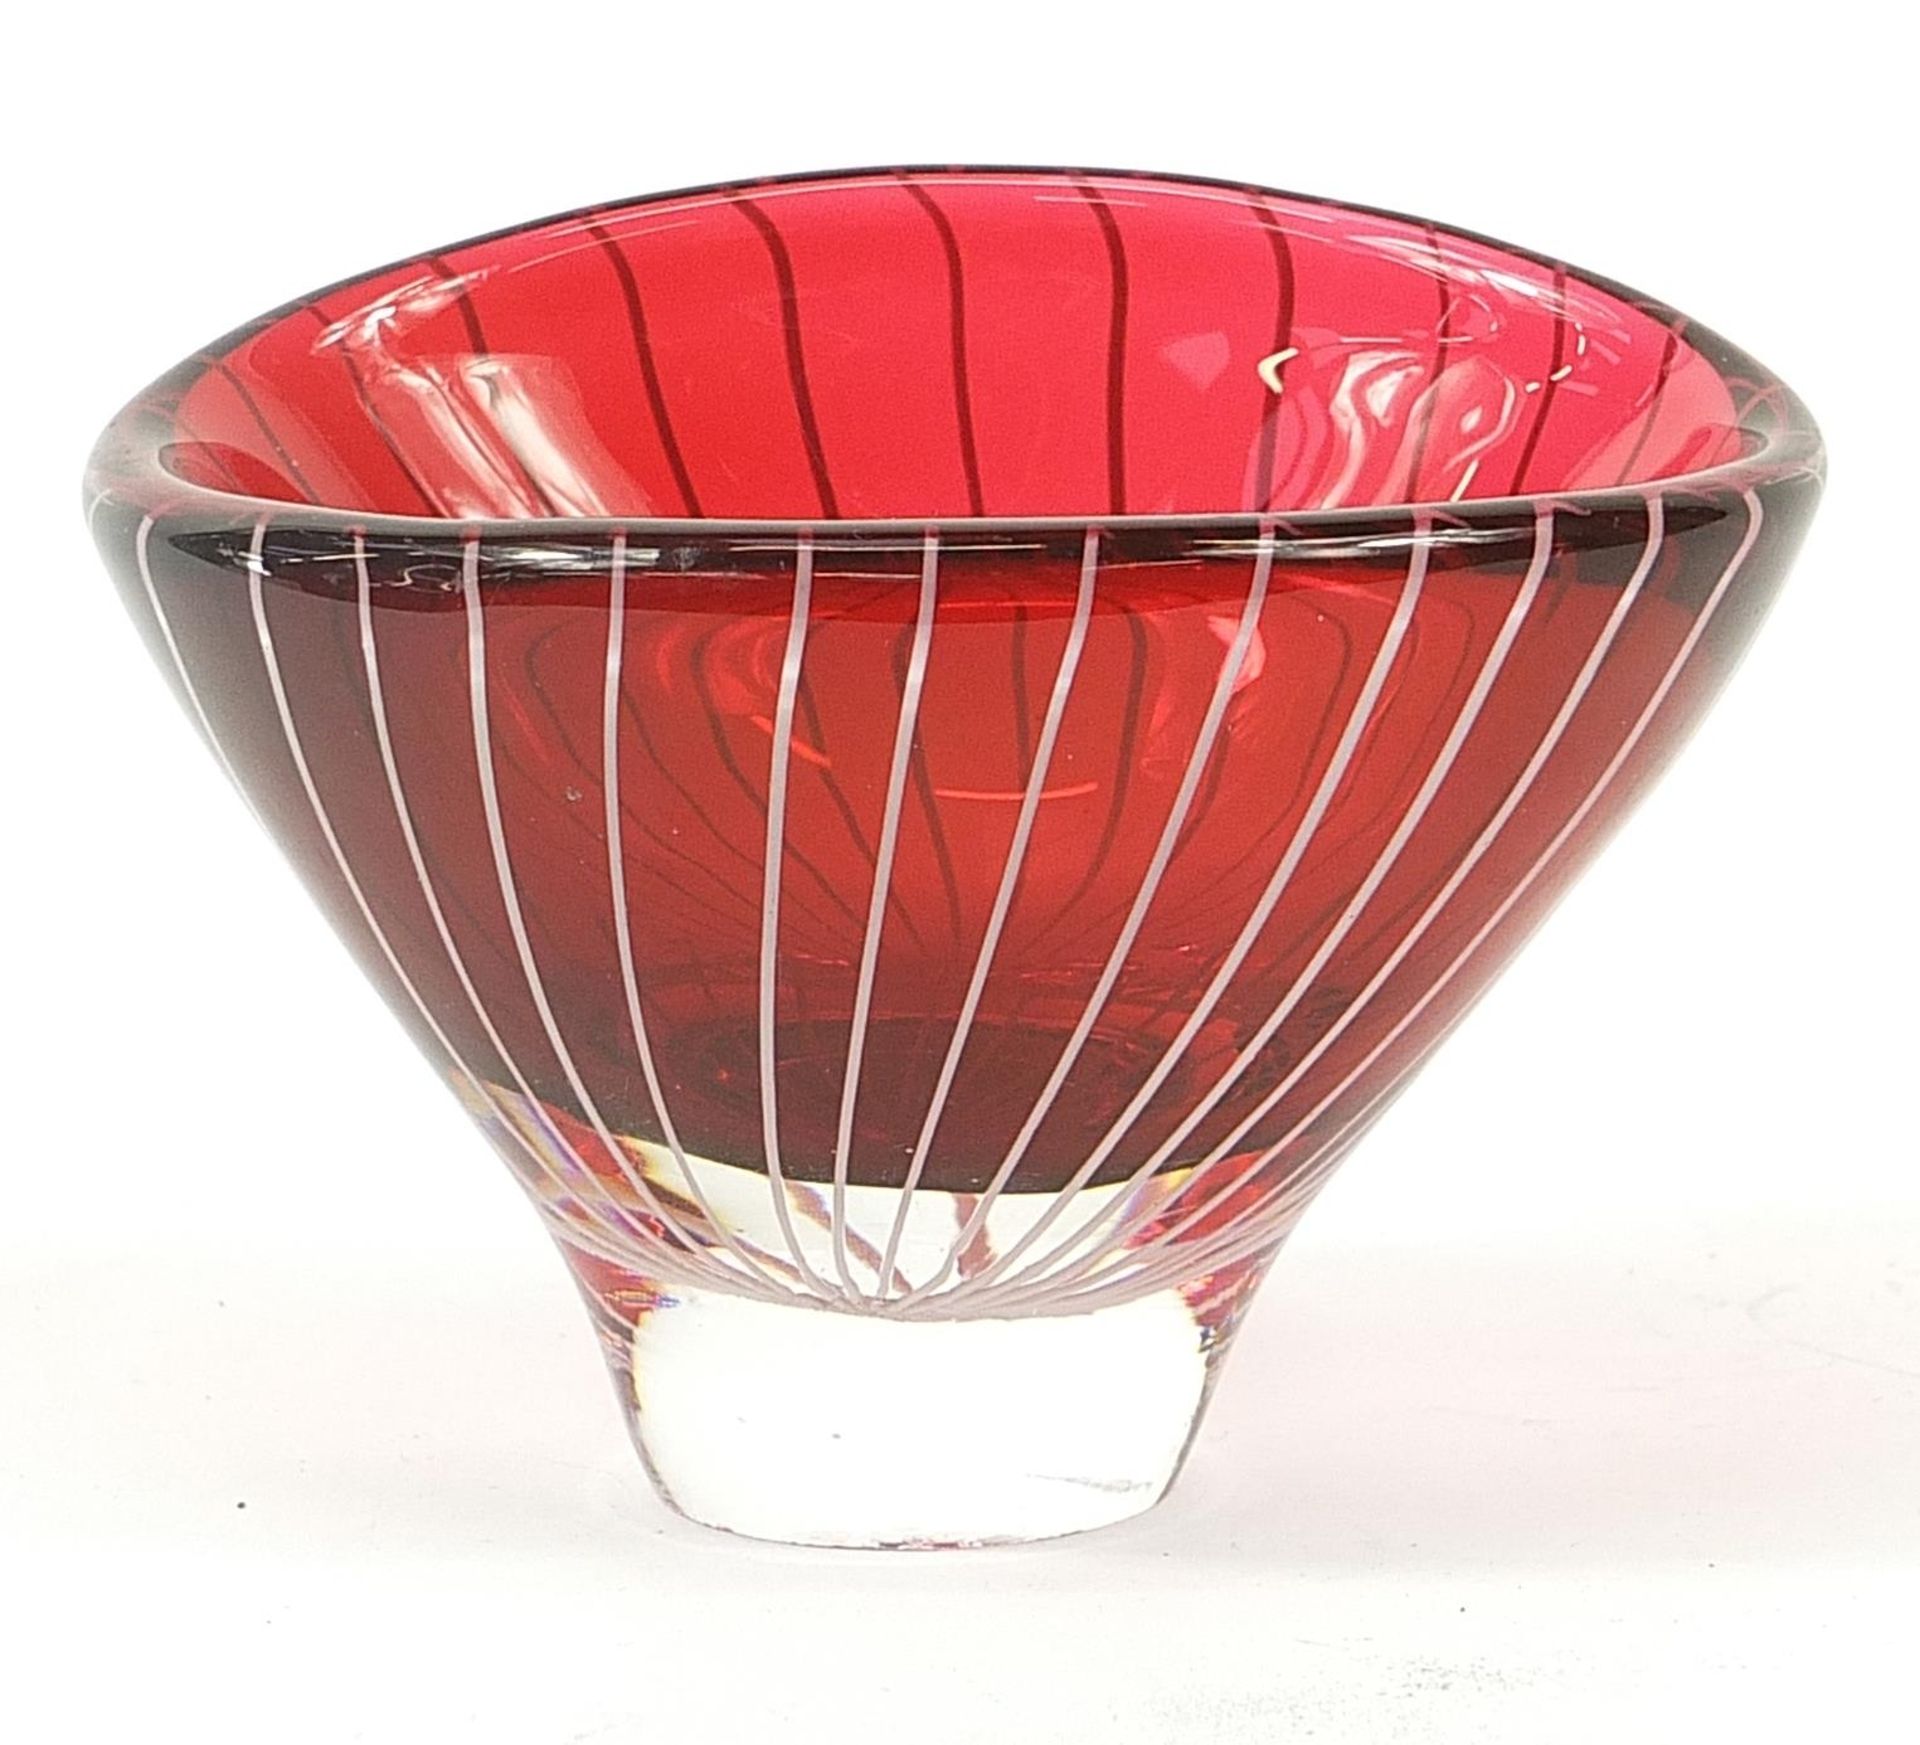 Vicke Lindstrand for Kosta Boda, Scandinavian glass bowl, etched LH1058 to the base, 8cm high